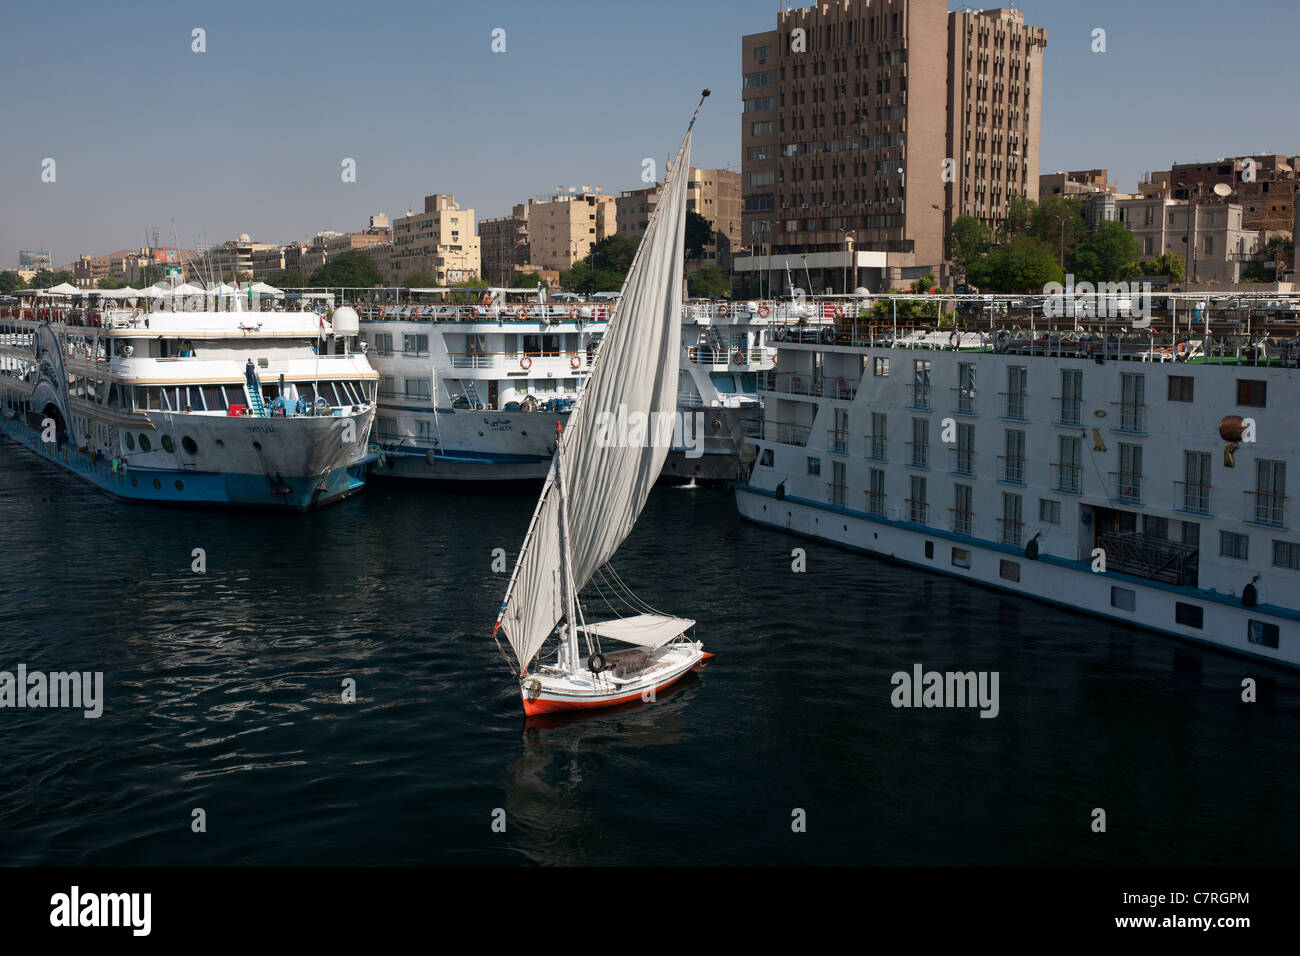 Falucca sails on the River Nile at Aswan, Egypt, Africa, with cruise boats moored alongside. Stock Photo